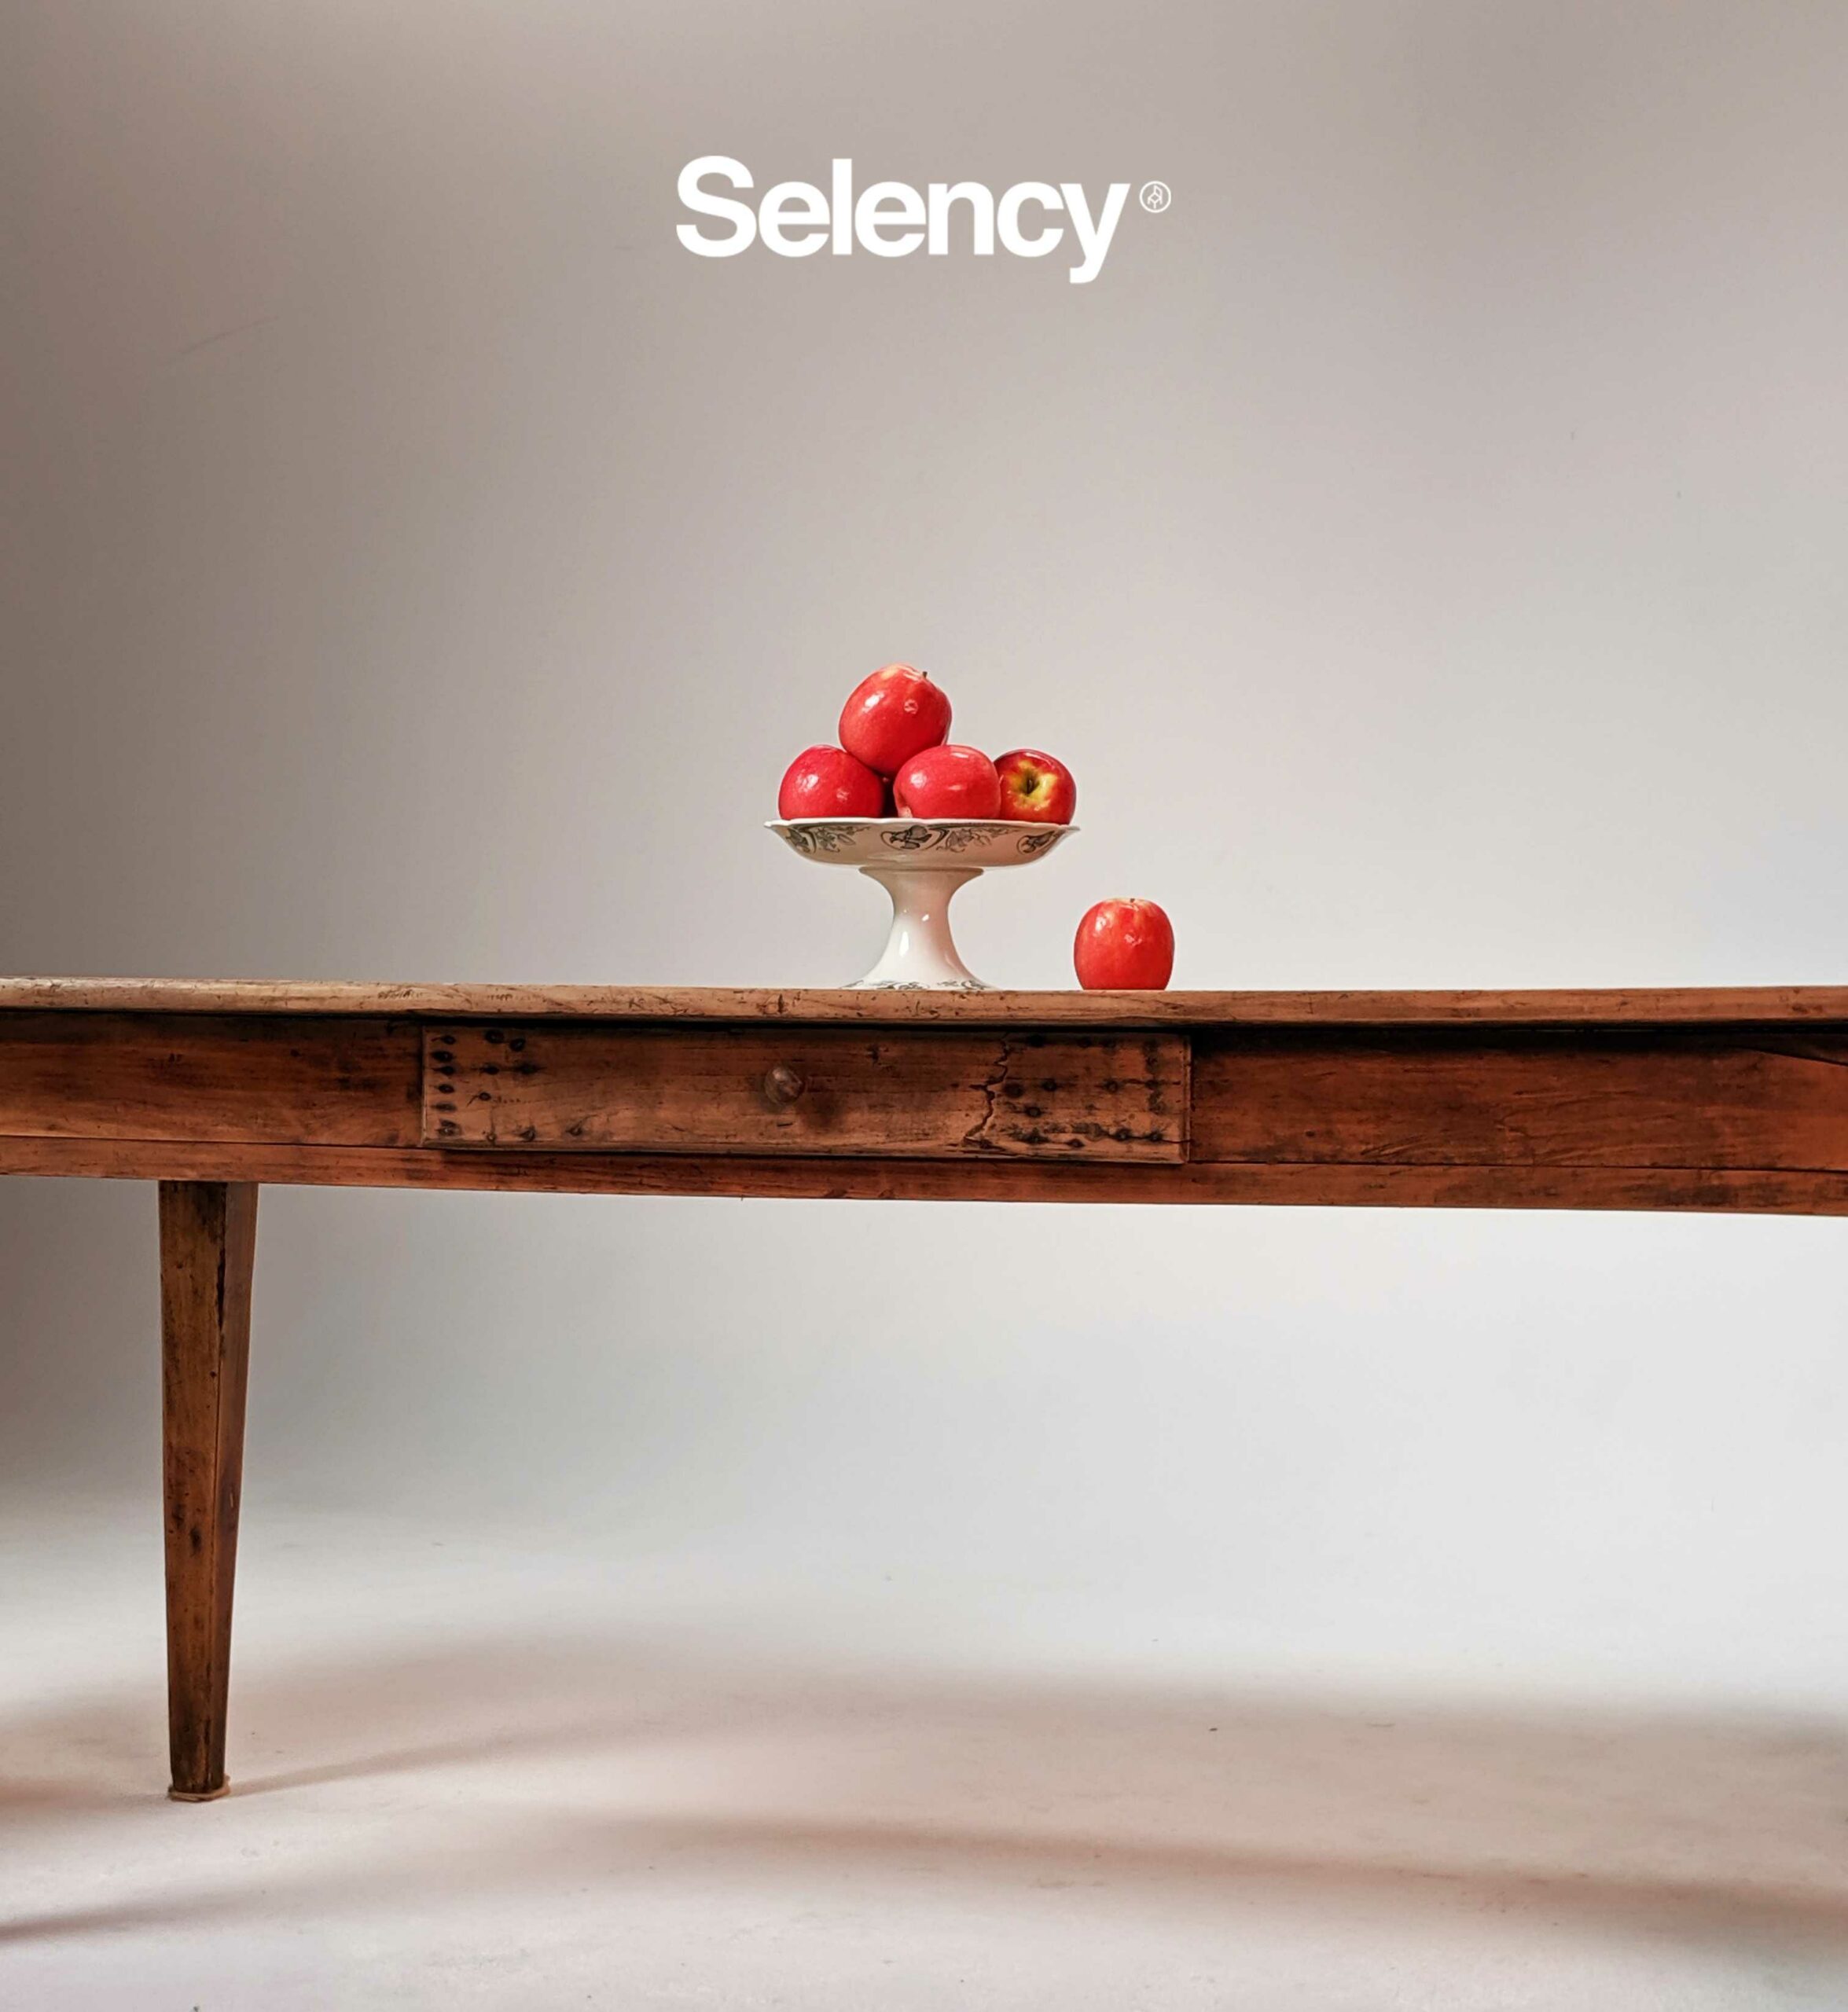 YOHANNES COUSY presents SELENCY with Sebastien Haddouck and ADRIEN POUJADE | TALENT MANAGEMENT - Set Design